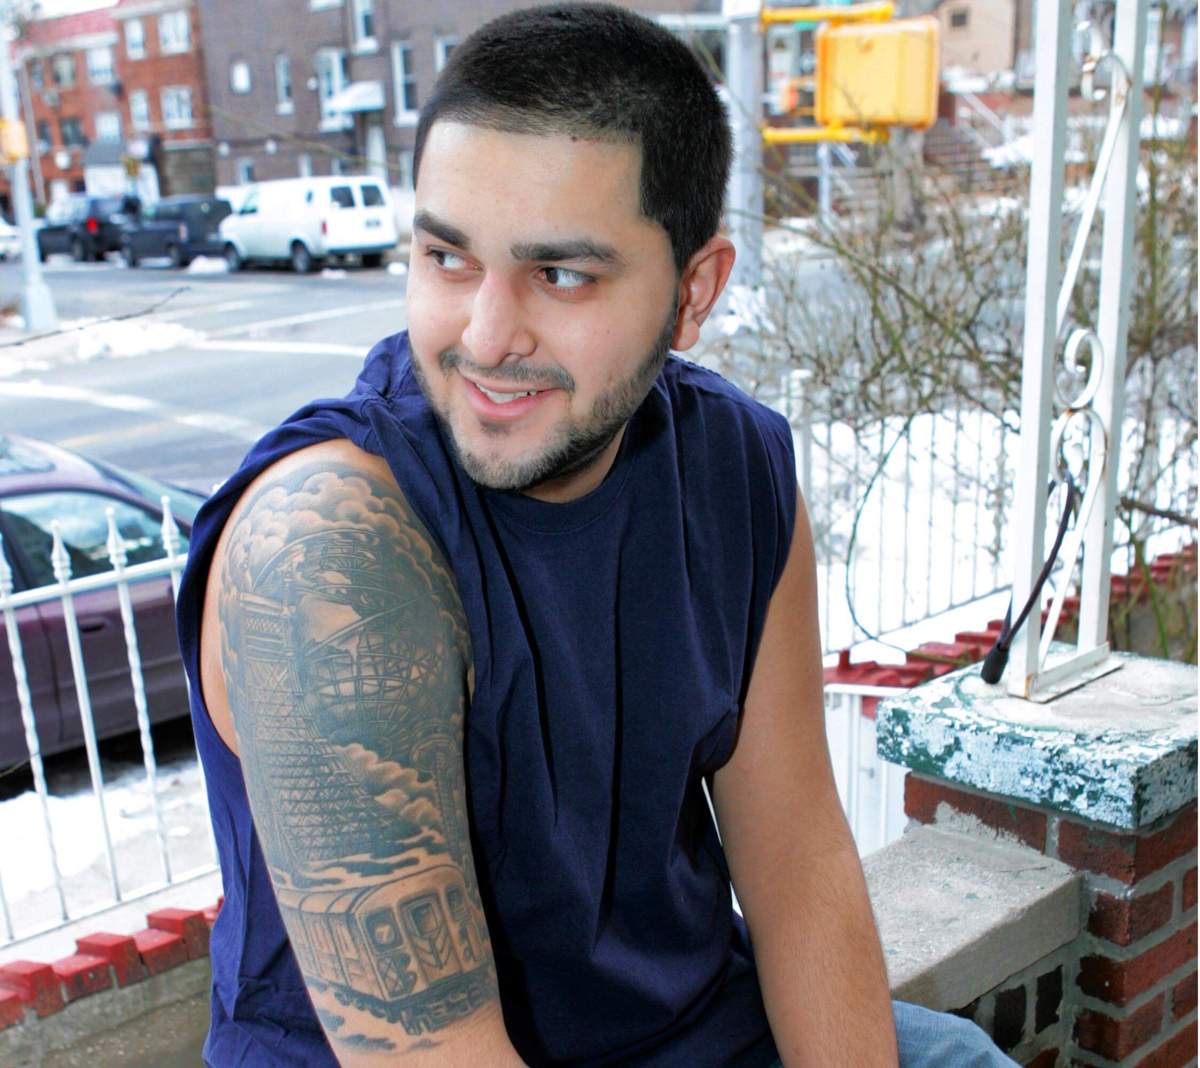 E. Elmhurst man pays tribute to Queens with sleeve tattoo